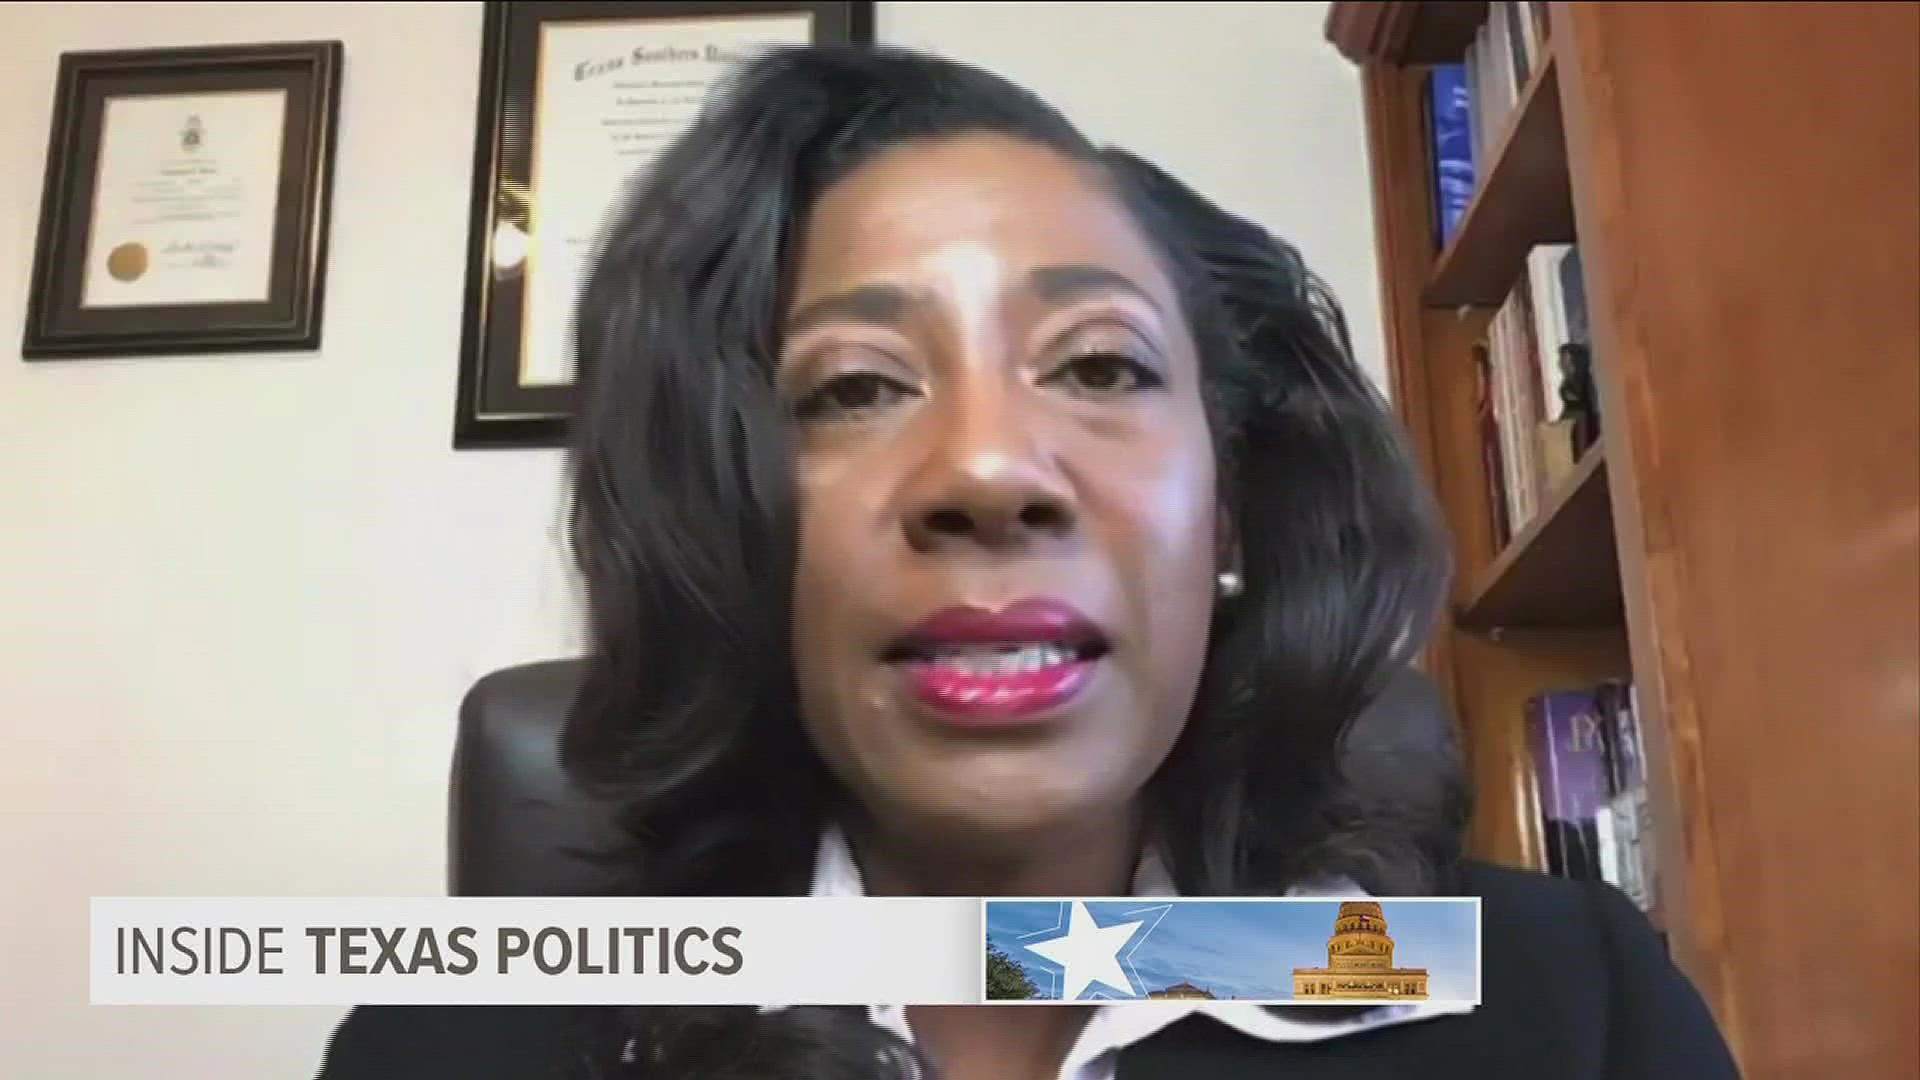 Attorney Elizabeth Frizell is blunt in her assessment of some of the decisions made by incumbent Dallas County DA John Creuzot.